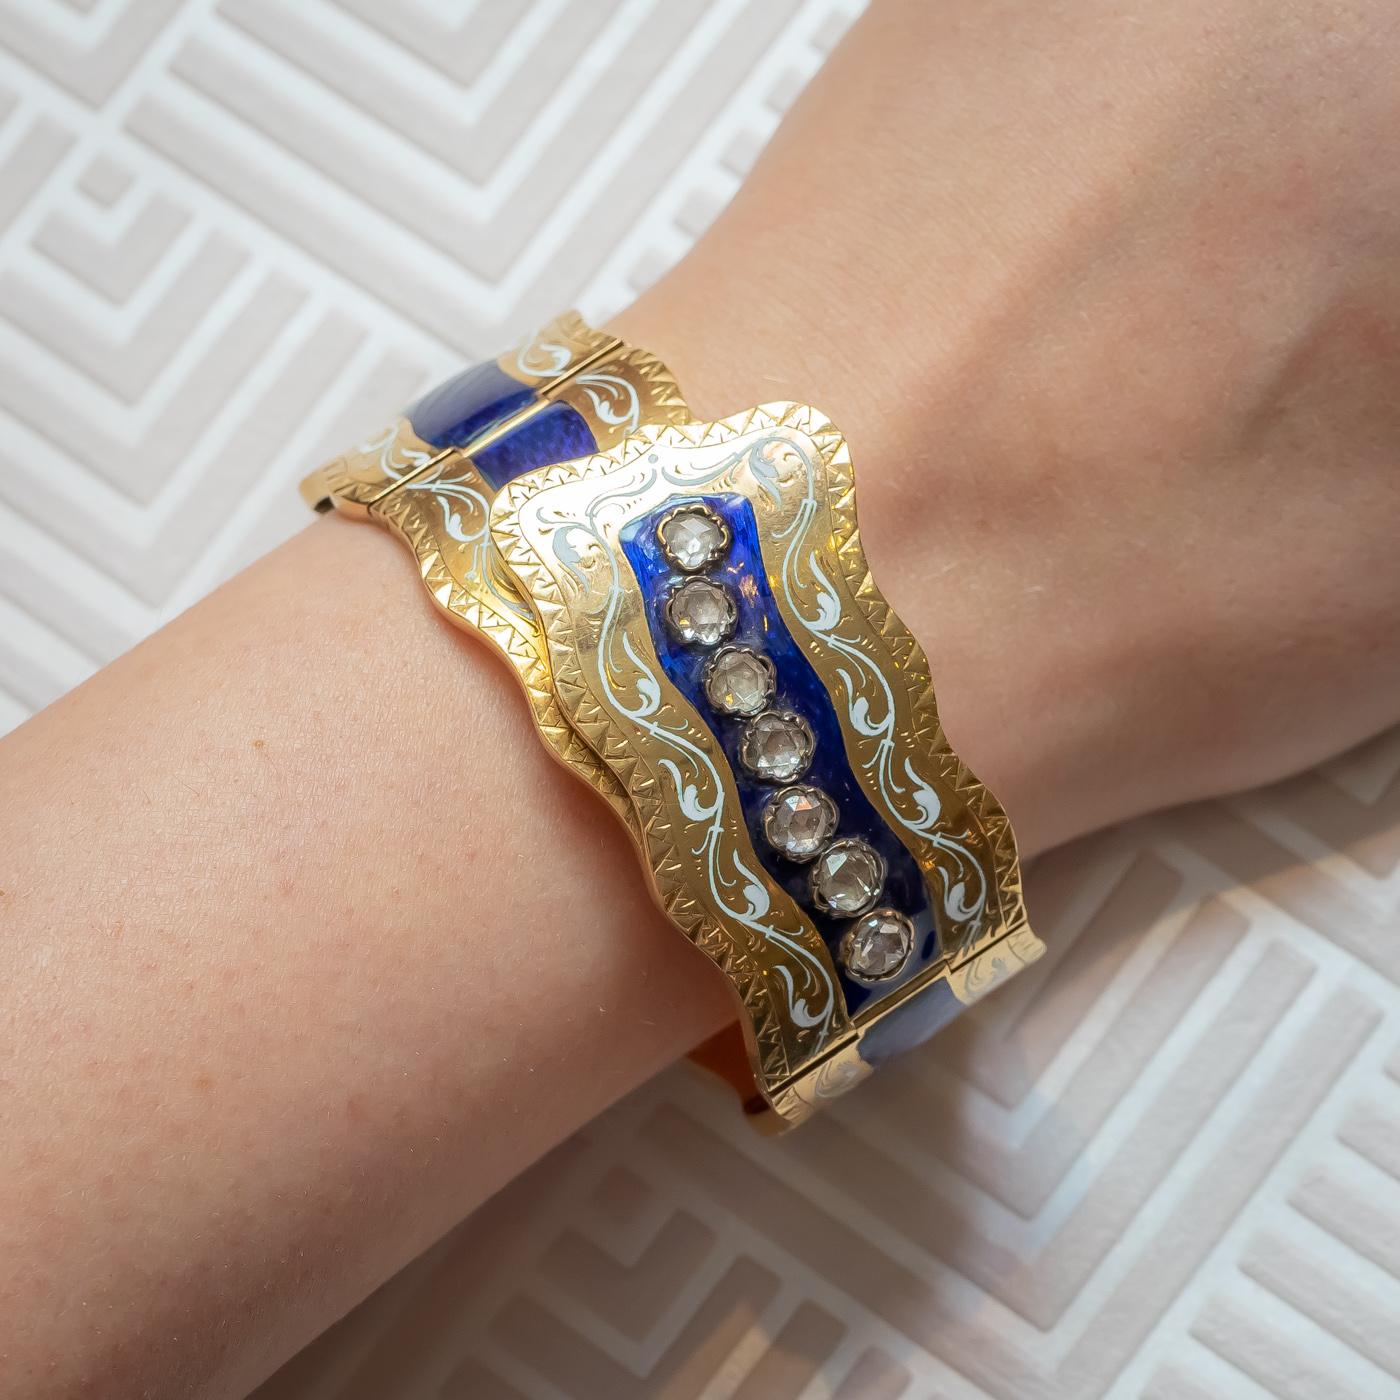 A Victorian enamel, diamond and gold bangle, formed of five plaques, with blue guilloche enamel centres, with scrolling white enamel decoration. The centre plaque is set with six rose-cut diamonds, each measuring an estimated 4.5mm in diameter, the